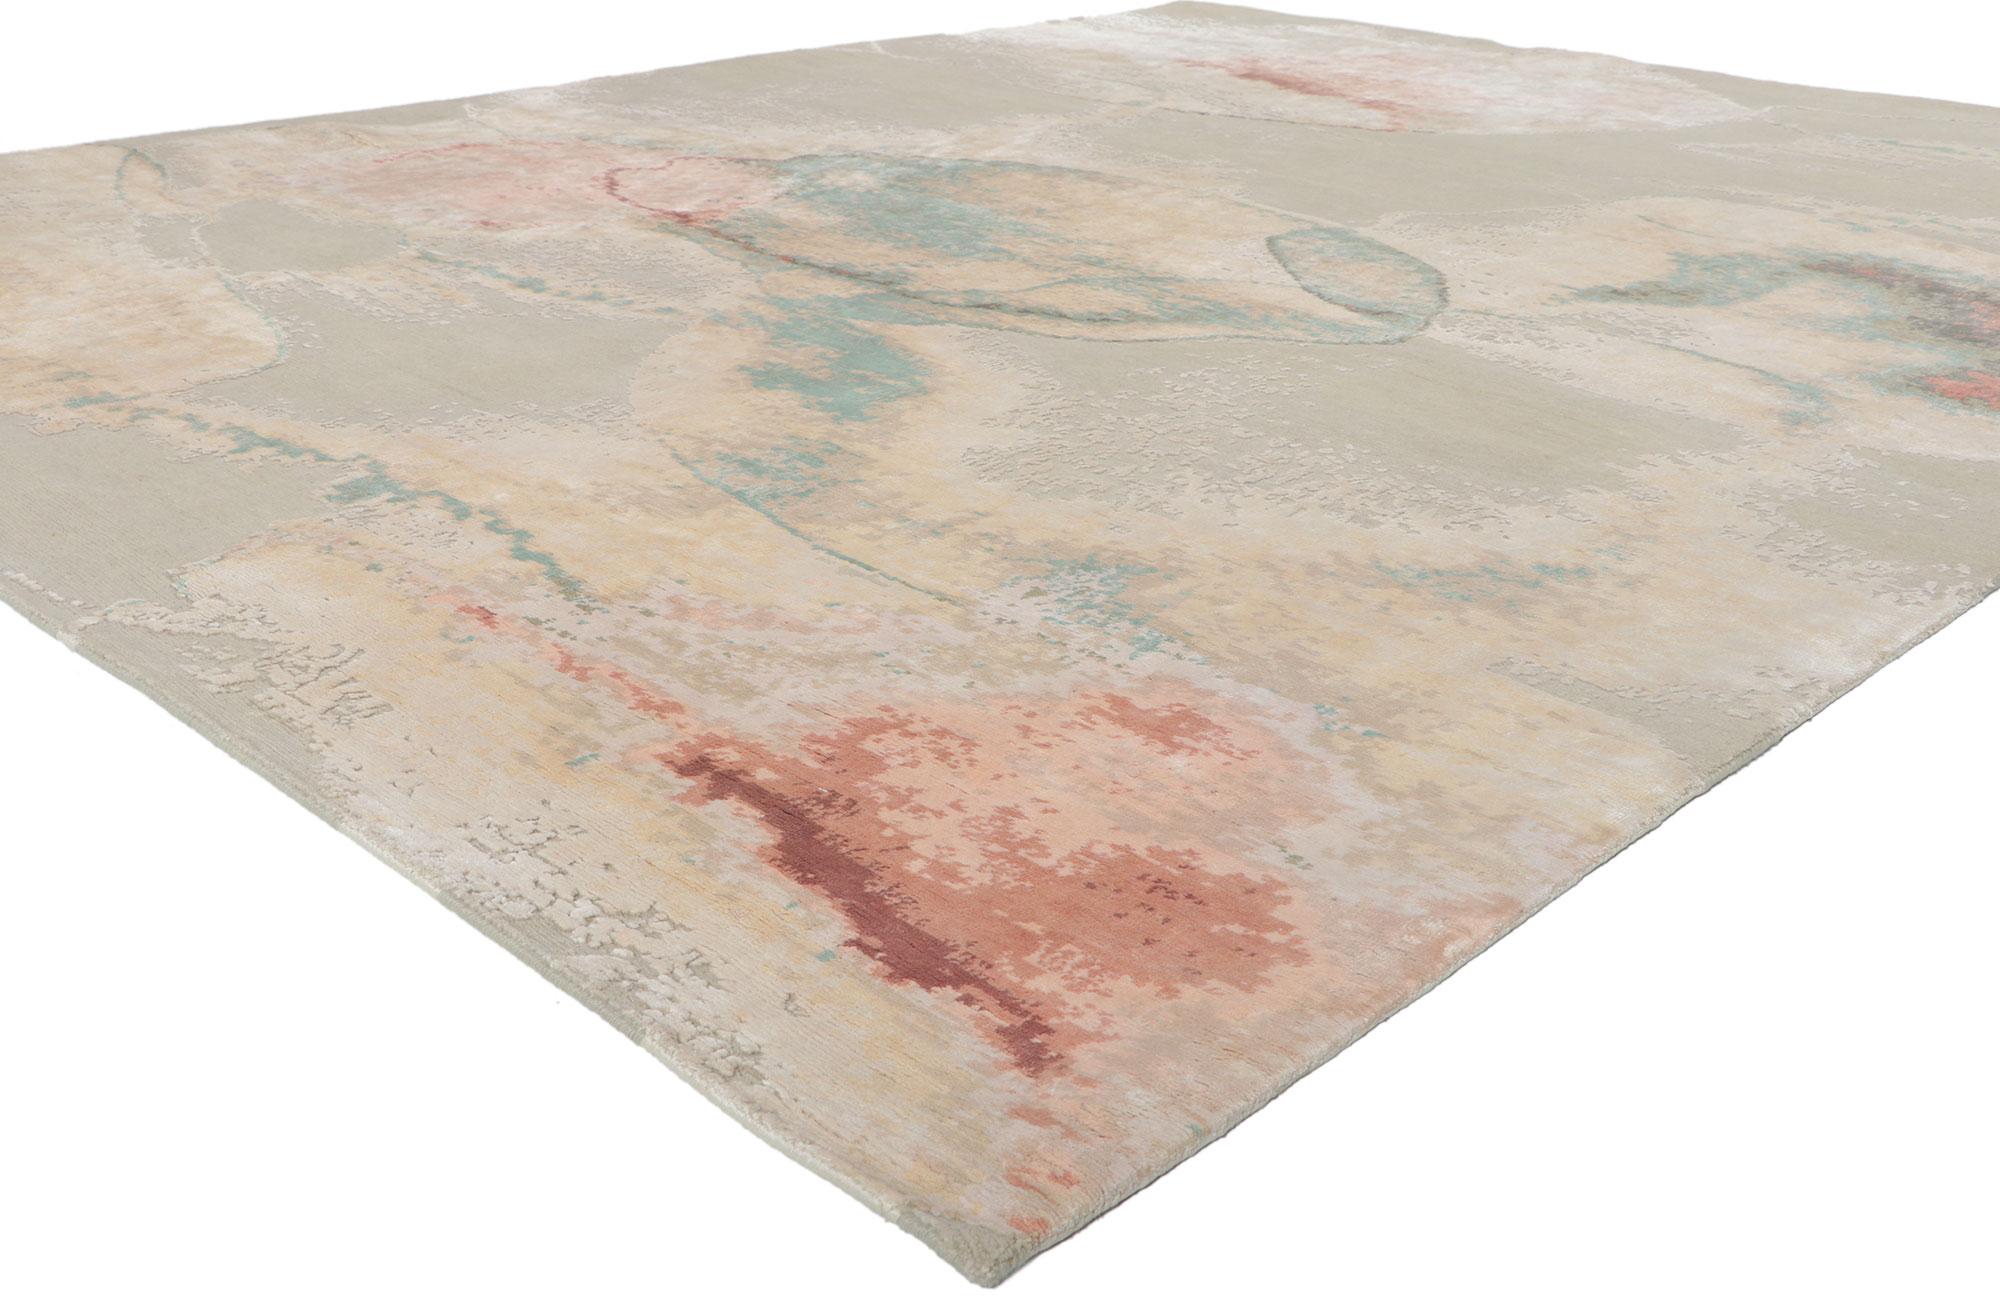 ??30865 new contemporary abstract rug inspired by Georgia O'Keeffe, 07'11 x 10'00. Showcasing a modern style and raised silk design with incredible detail and texture, this hand knotted contemporary textured rug is a captivating vision of woven